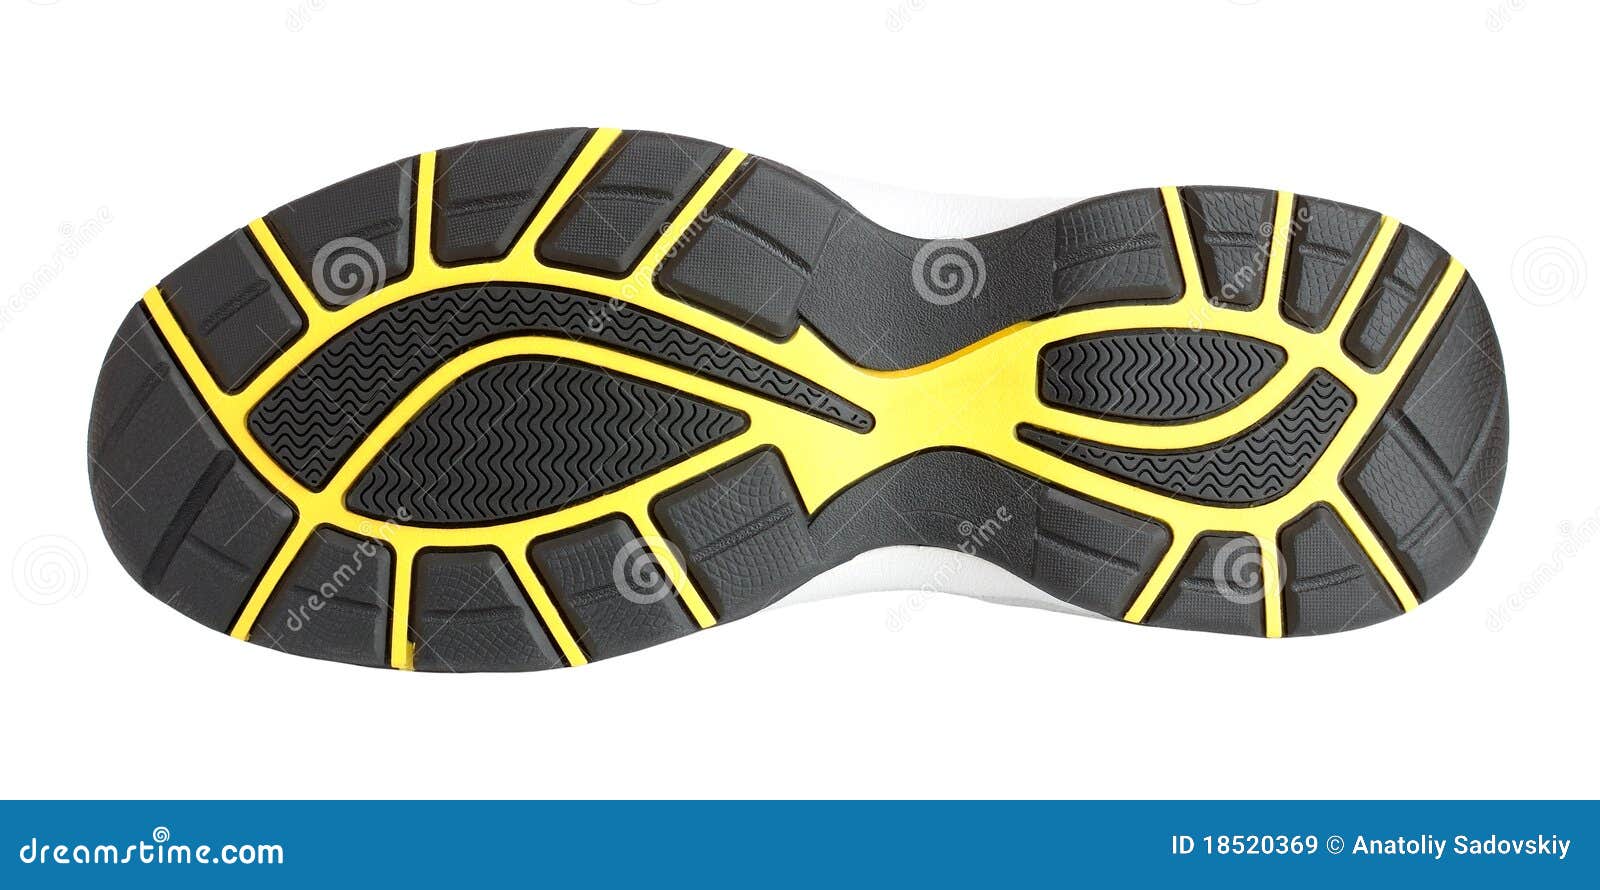 Sole Of Sport Shoe Royalty Free Stock Images - Image: 18520369